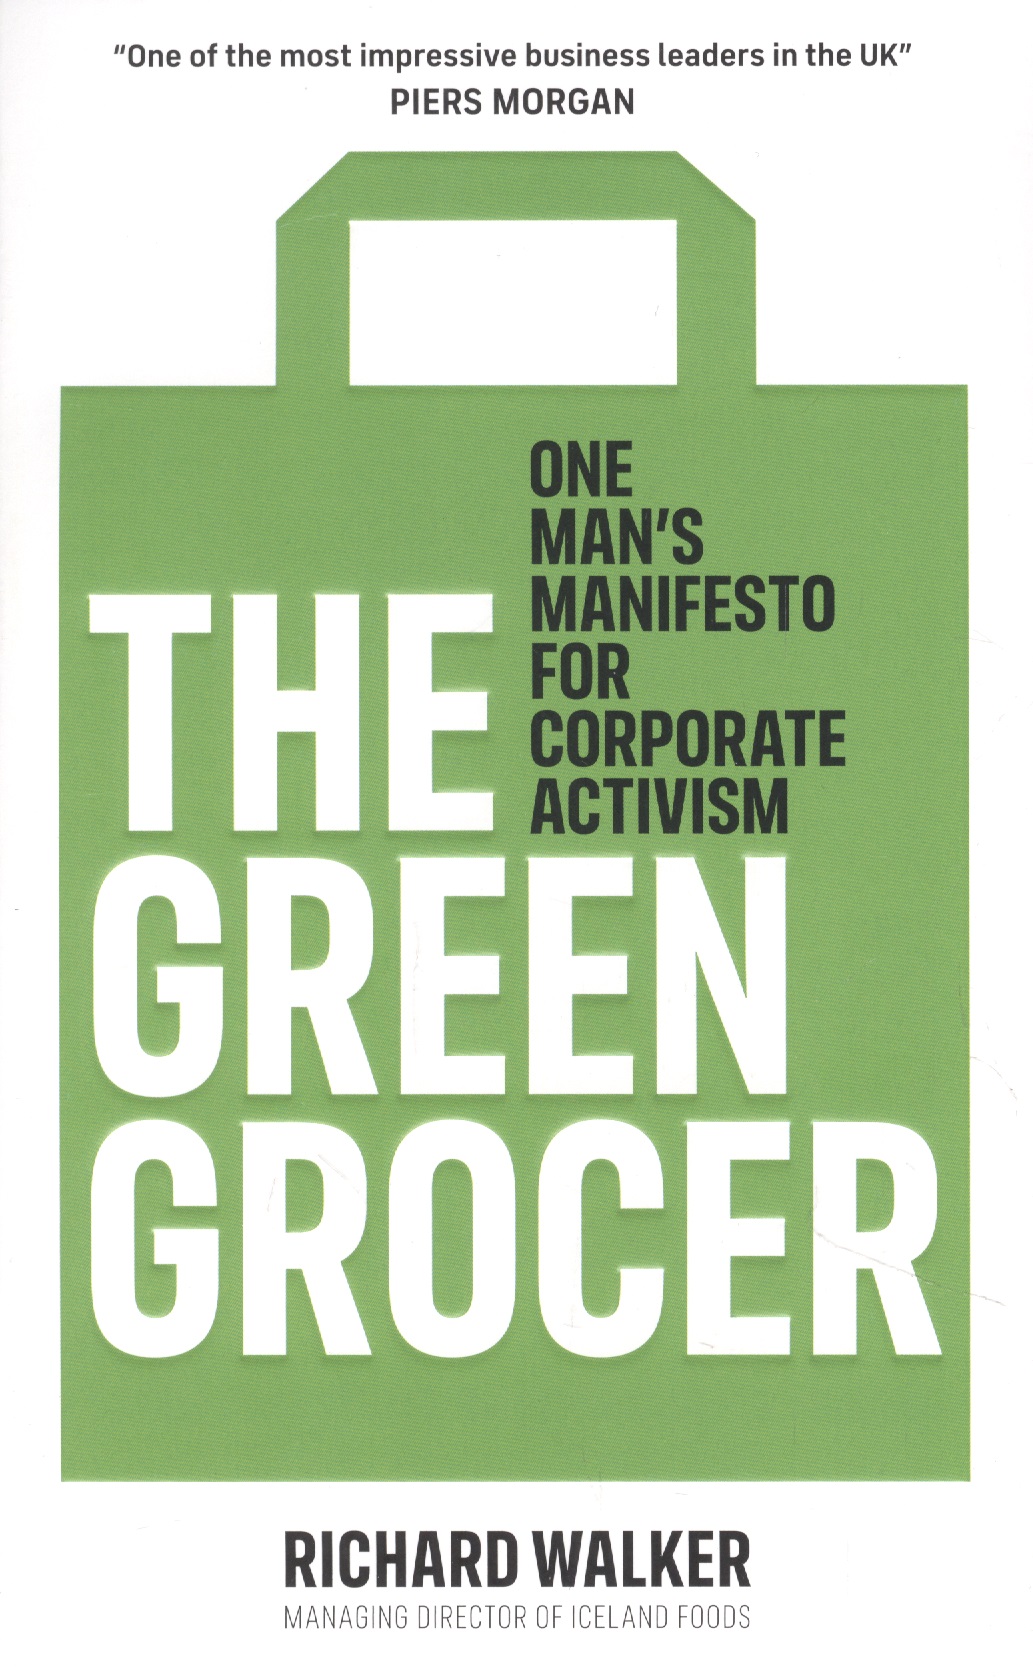 The Green Grocer. One Mans Manifesto for Corporate Activism the green grocer one mans manifesto for corporate activism